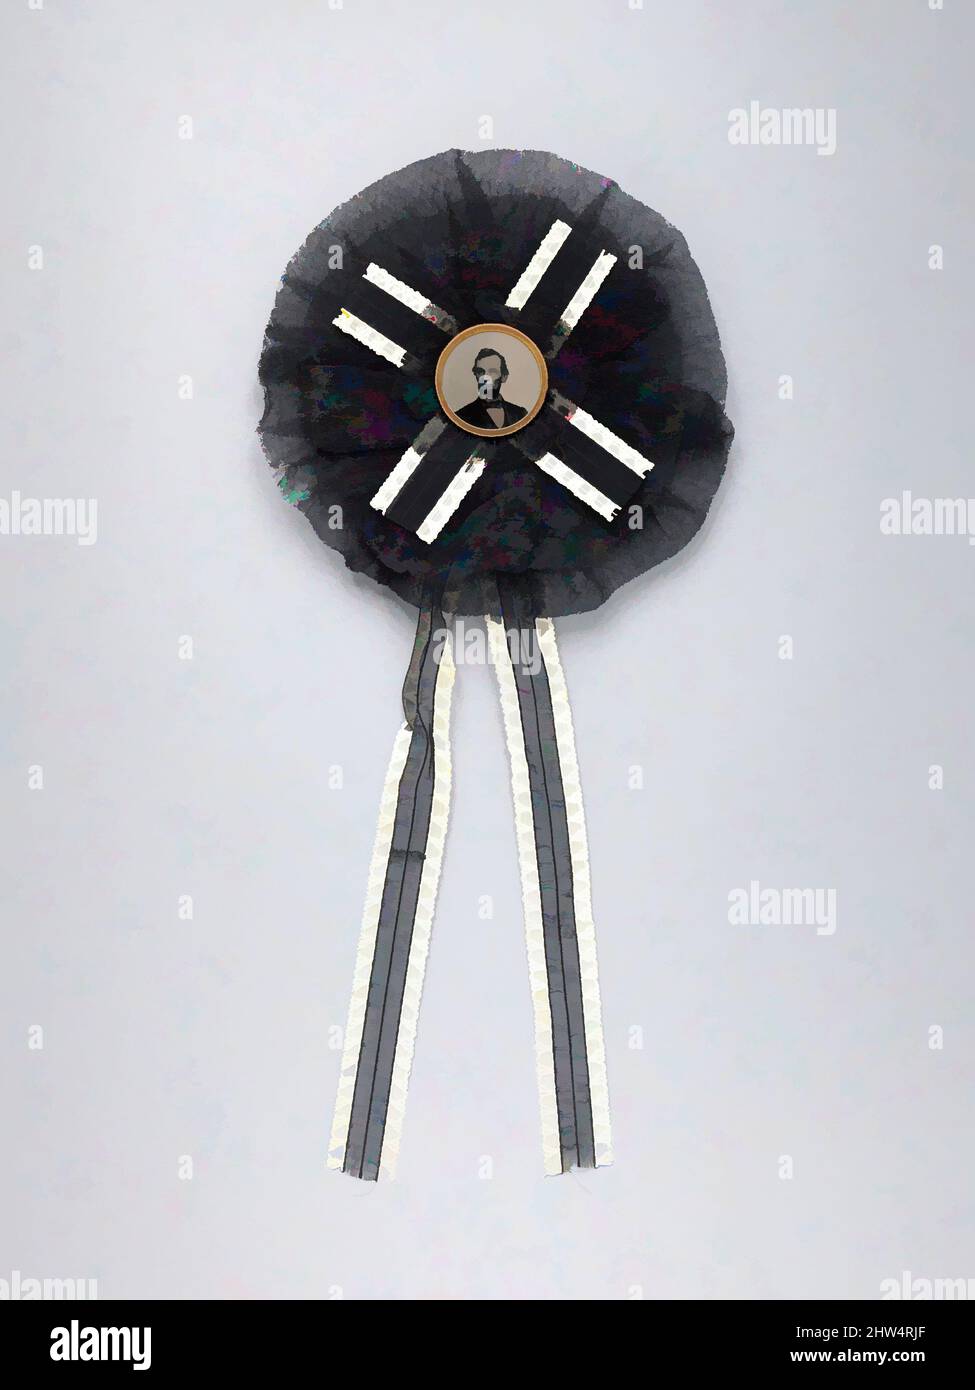 Art inspired by Mourning Corsage with Portrait of Abraham Lincoln, April 1865, Black and white silk with tintype set inside brass button, 20 x 9 cm (7 7/8 x 3 9/16 in.), Assemblages, Unknown (American), About the time of Abraham Lincoln’s long funeral tour, April 21 to May 3, 1865, Classic works modernized by Artotop with a splash of modernity. Shapes, color and value, eye-catching visual impact on art. Emotions through freedom of artworks in a contemporary way. A timeless message pursuing a wildly creative new direction. Artists turning to the digital medium and creating the Artotop NFT Stock Photo